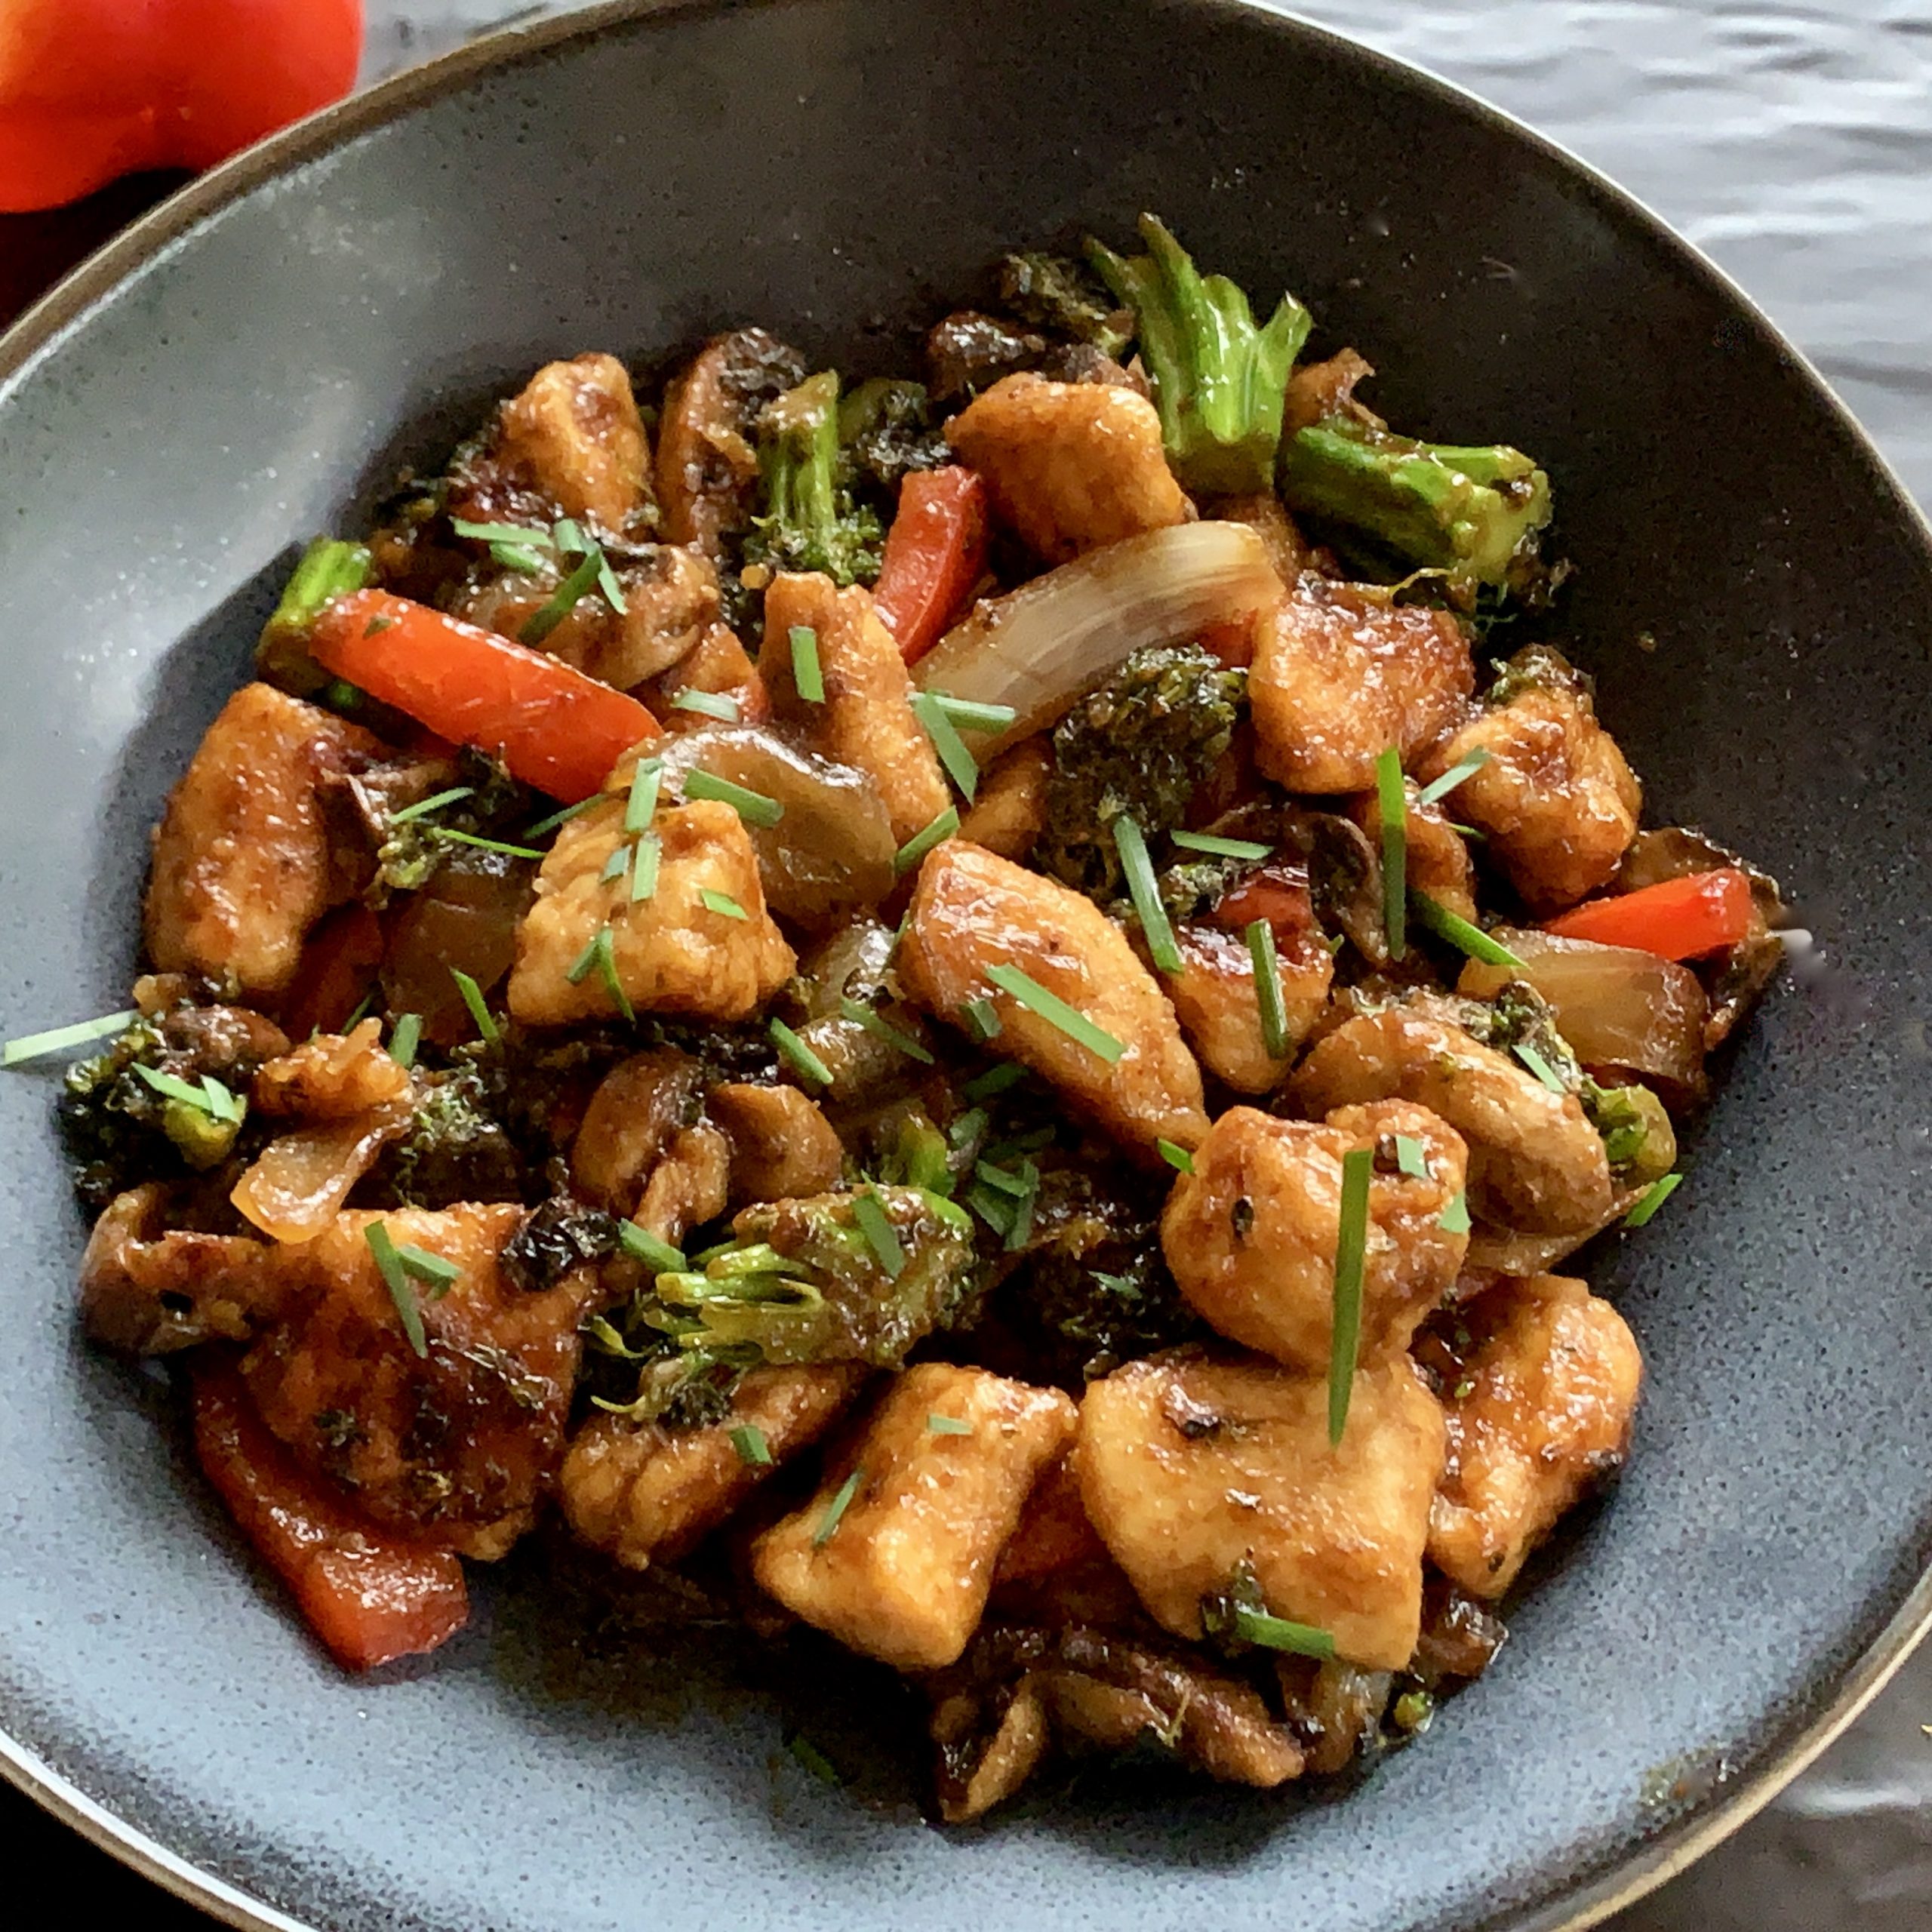 Chicken and Broccolini Stir Fry for One. A bowl of healthy chicken chunks red capsicum, brocollini and chivess, coated in a tasty sauce and cooked in 20 minutes